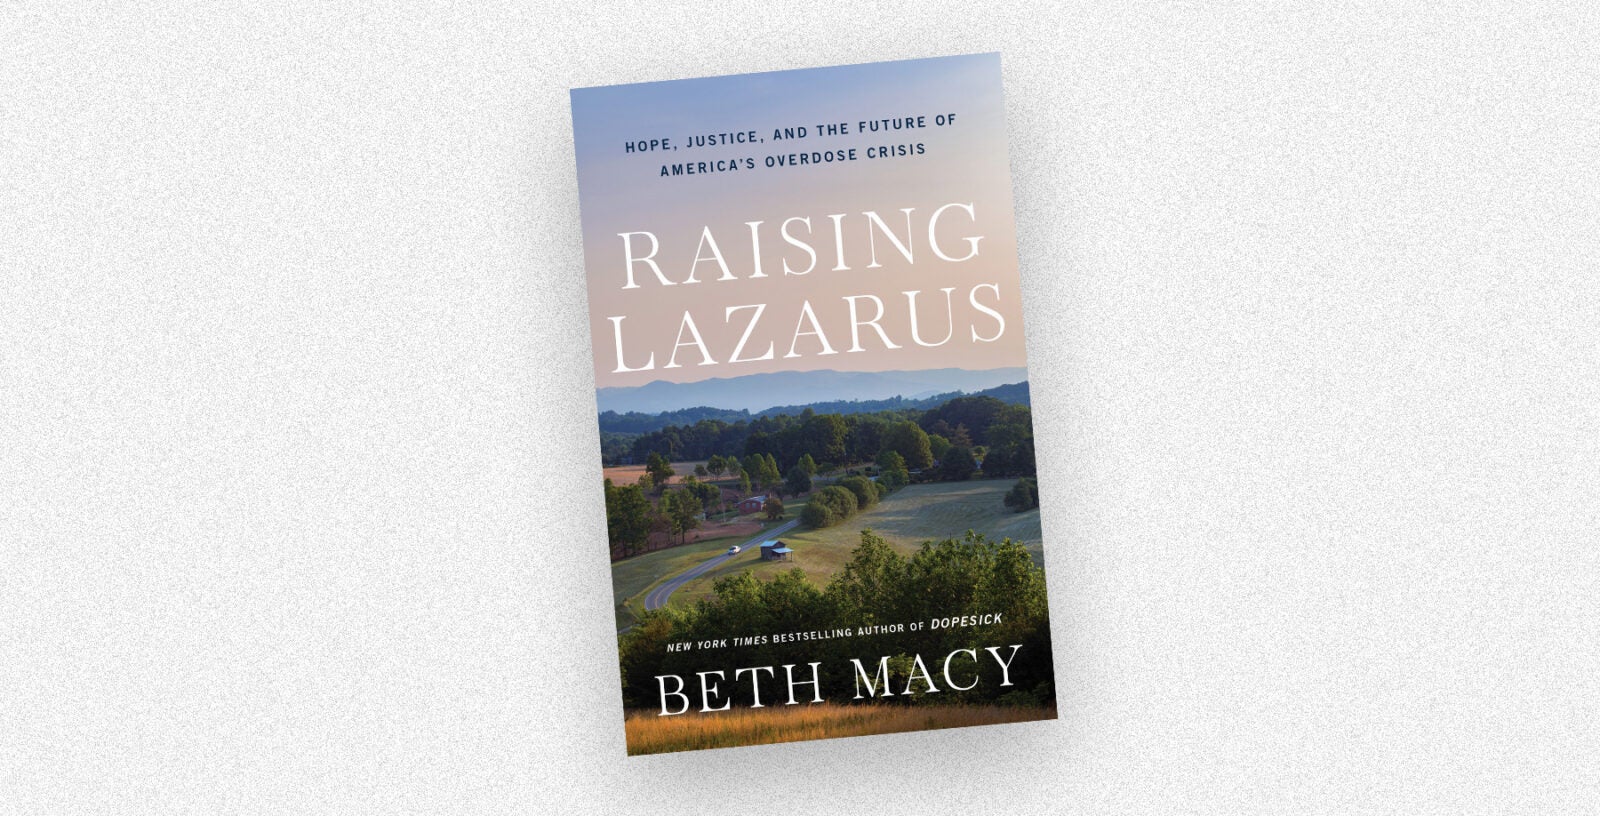 The book cover for "Raising Lazarus" by Beth Macy rests on a white-speckled background.